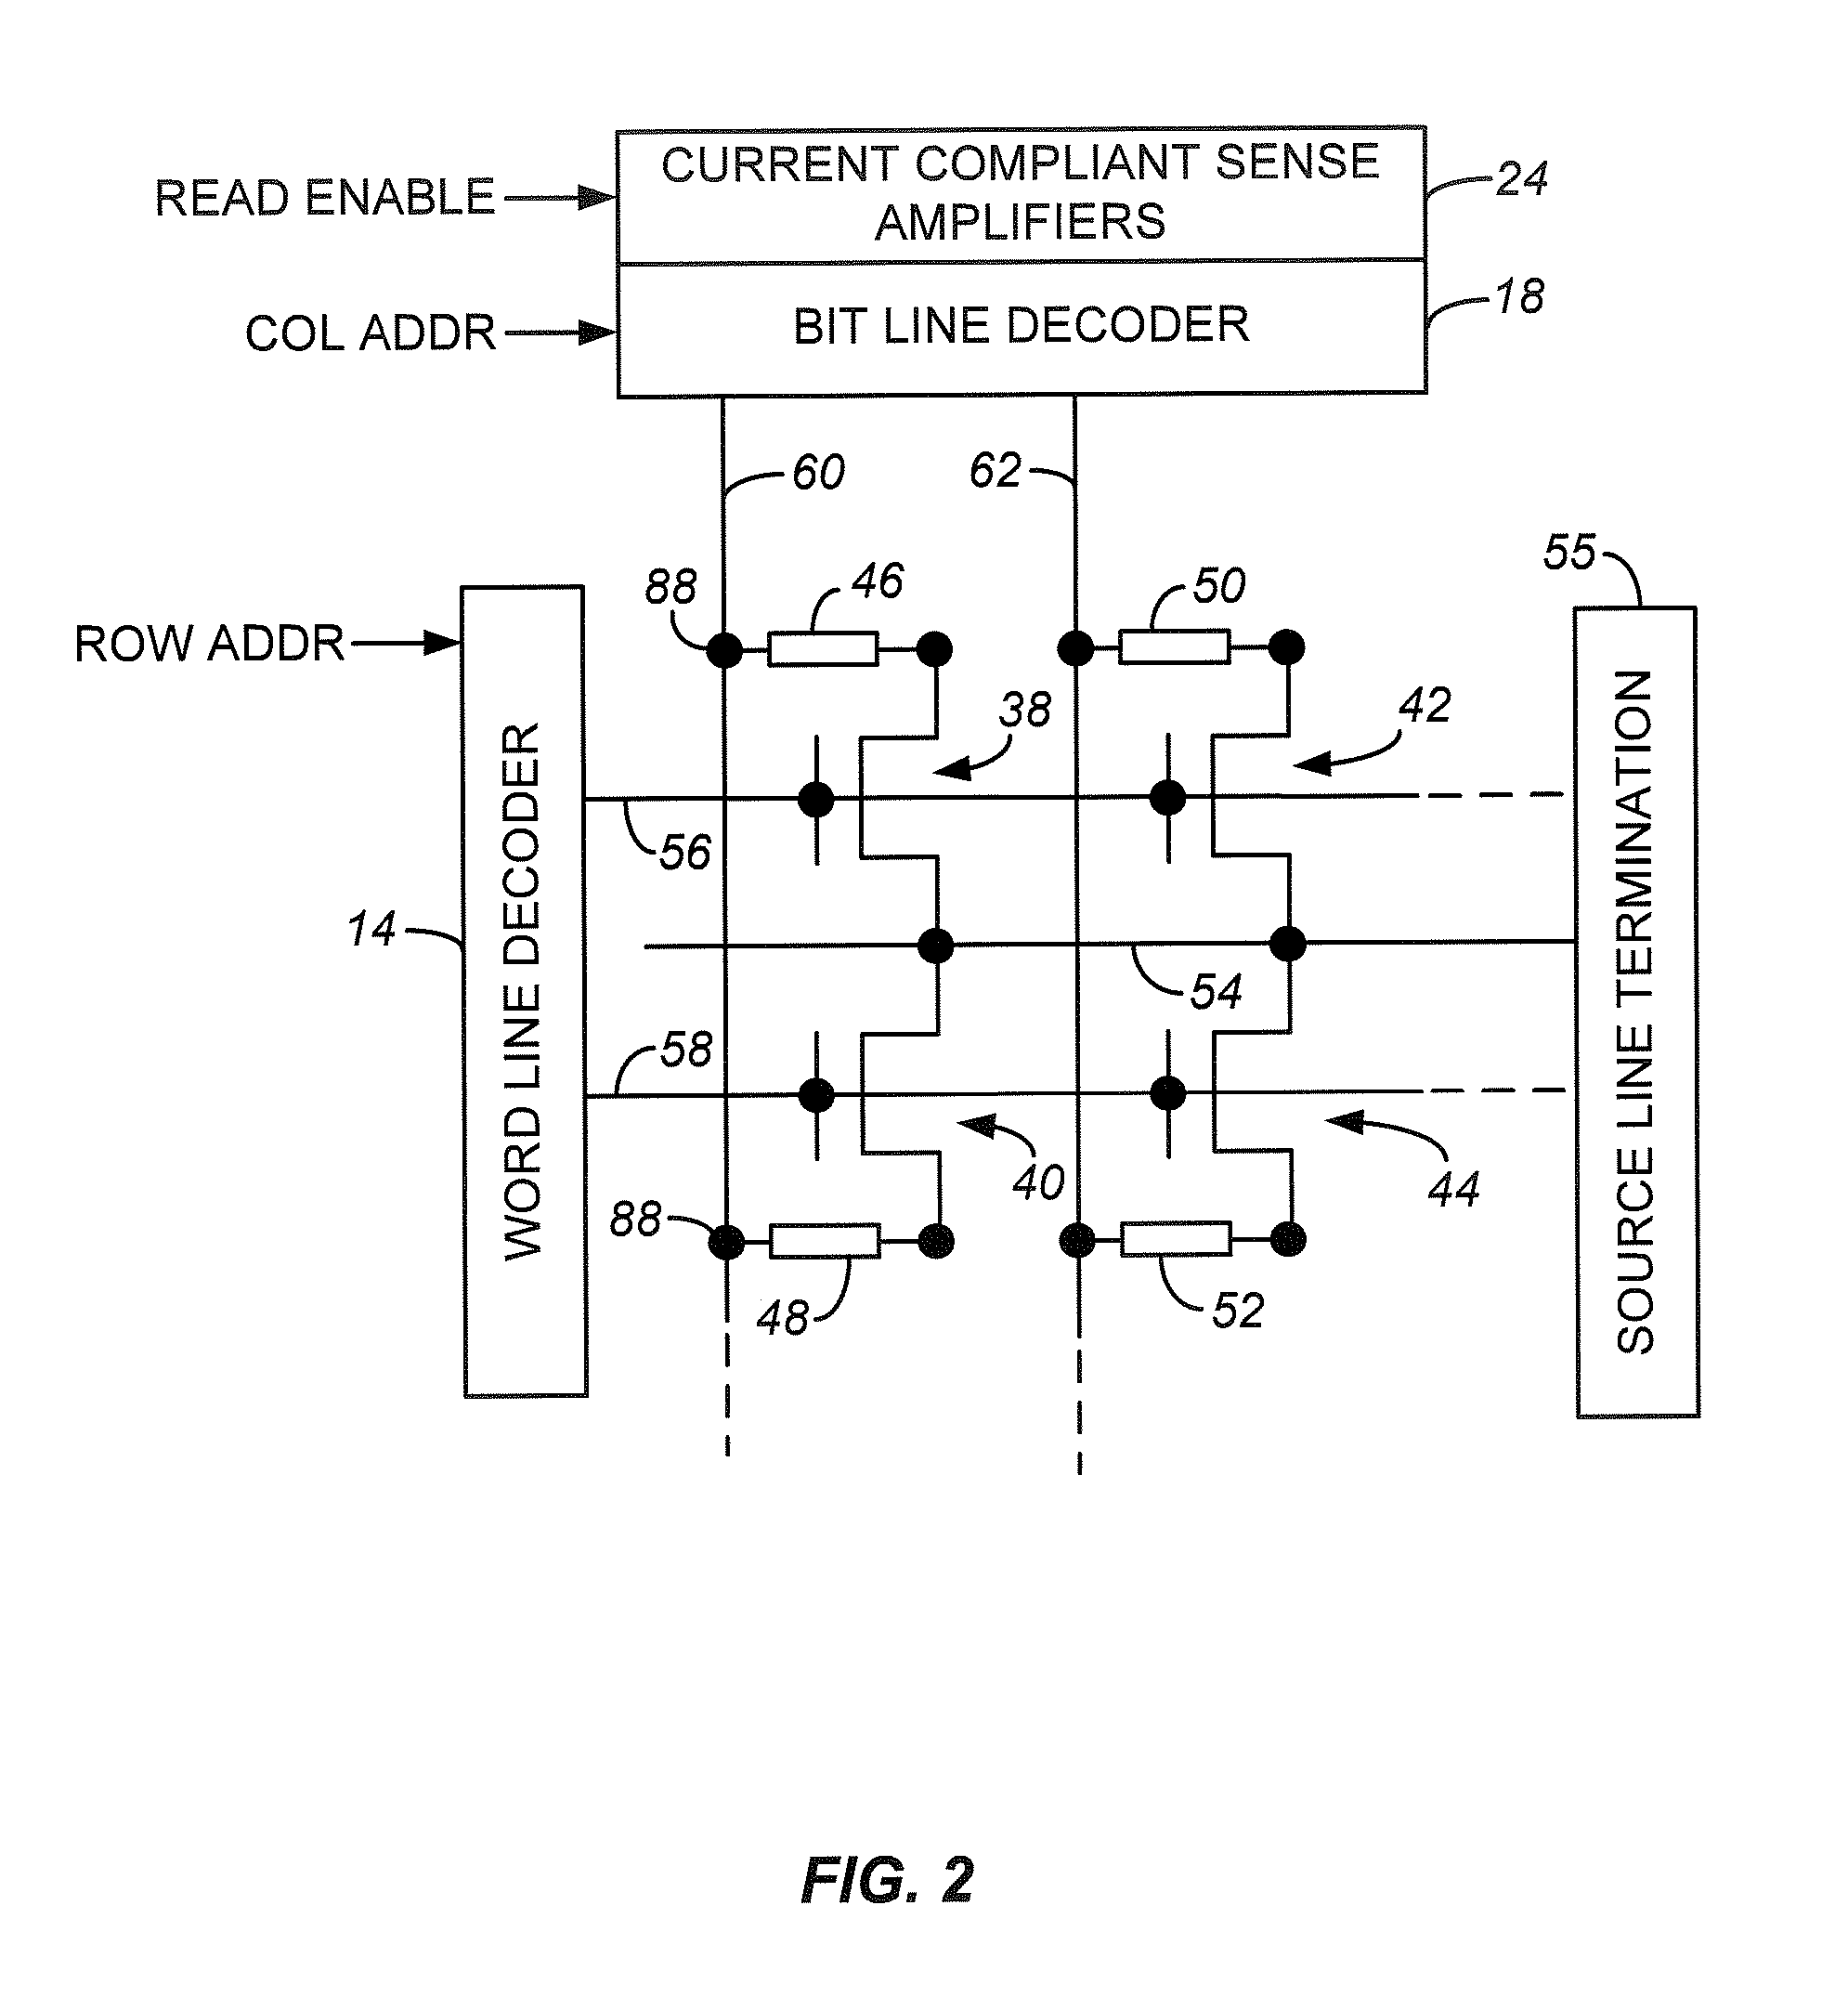 Memory cell sidewall contacting side electrode